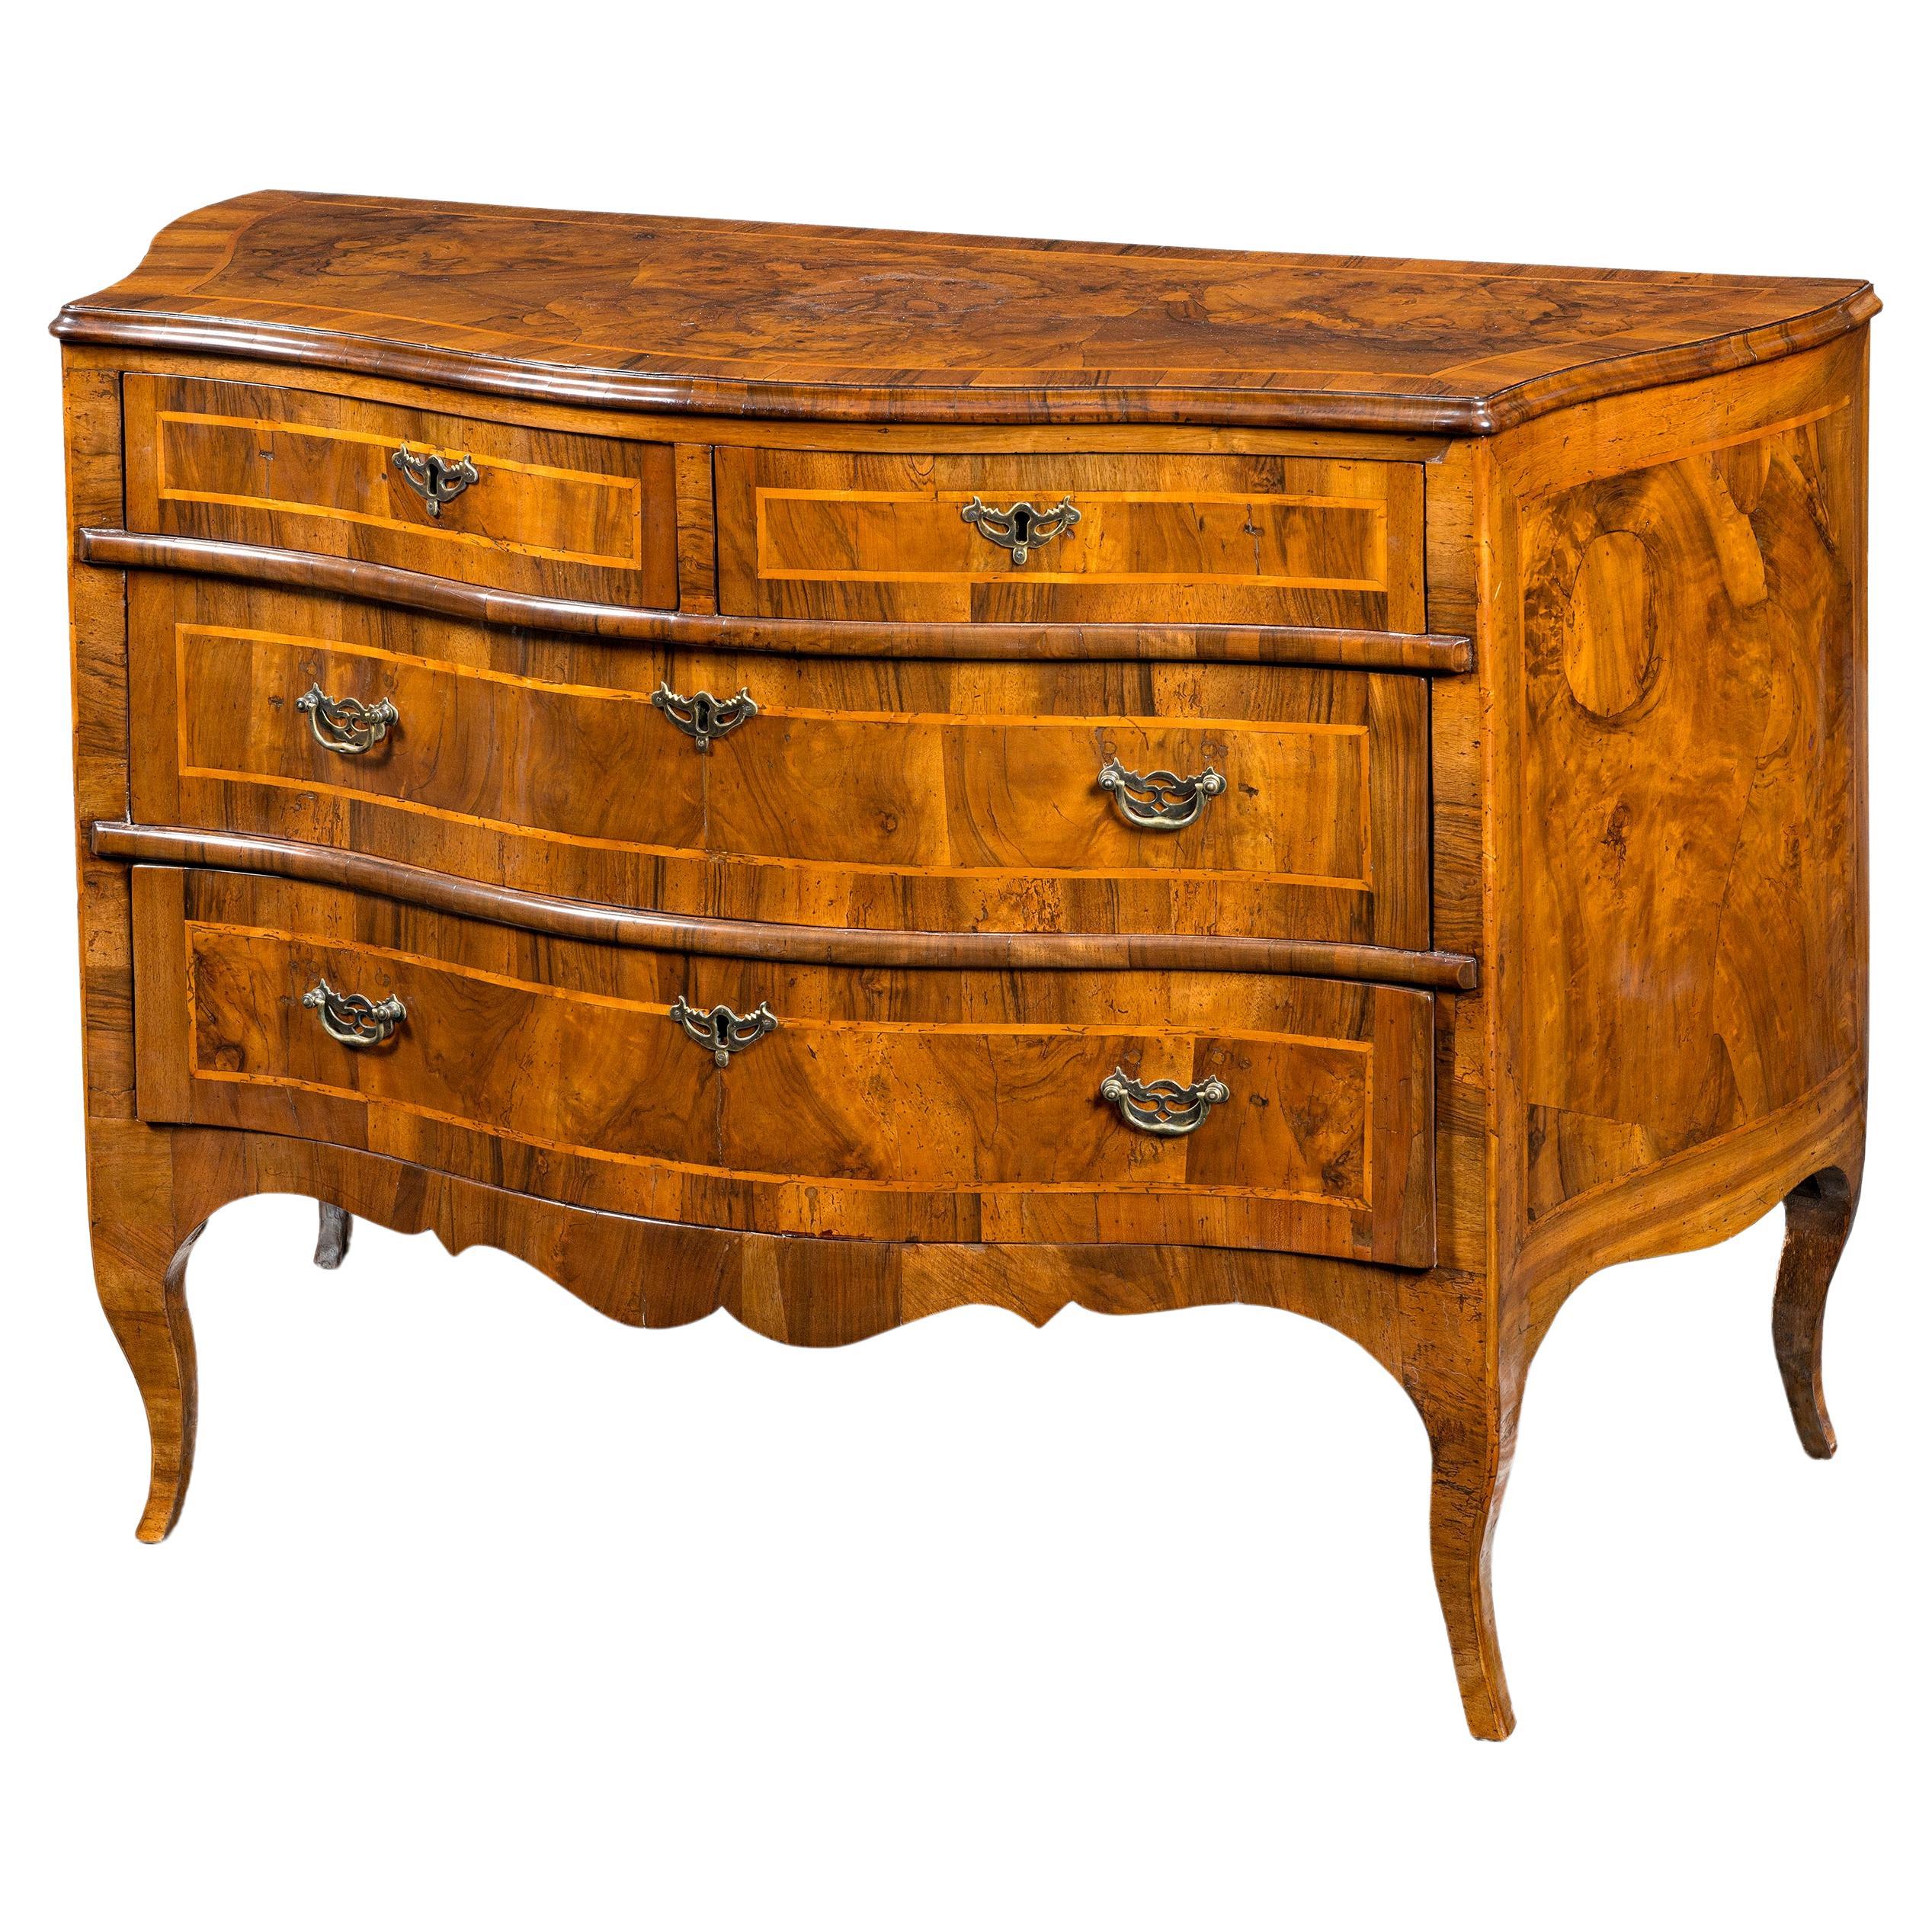 Venetian dresser shaped on the front and sides, 18th century